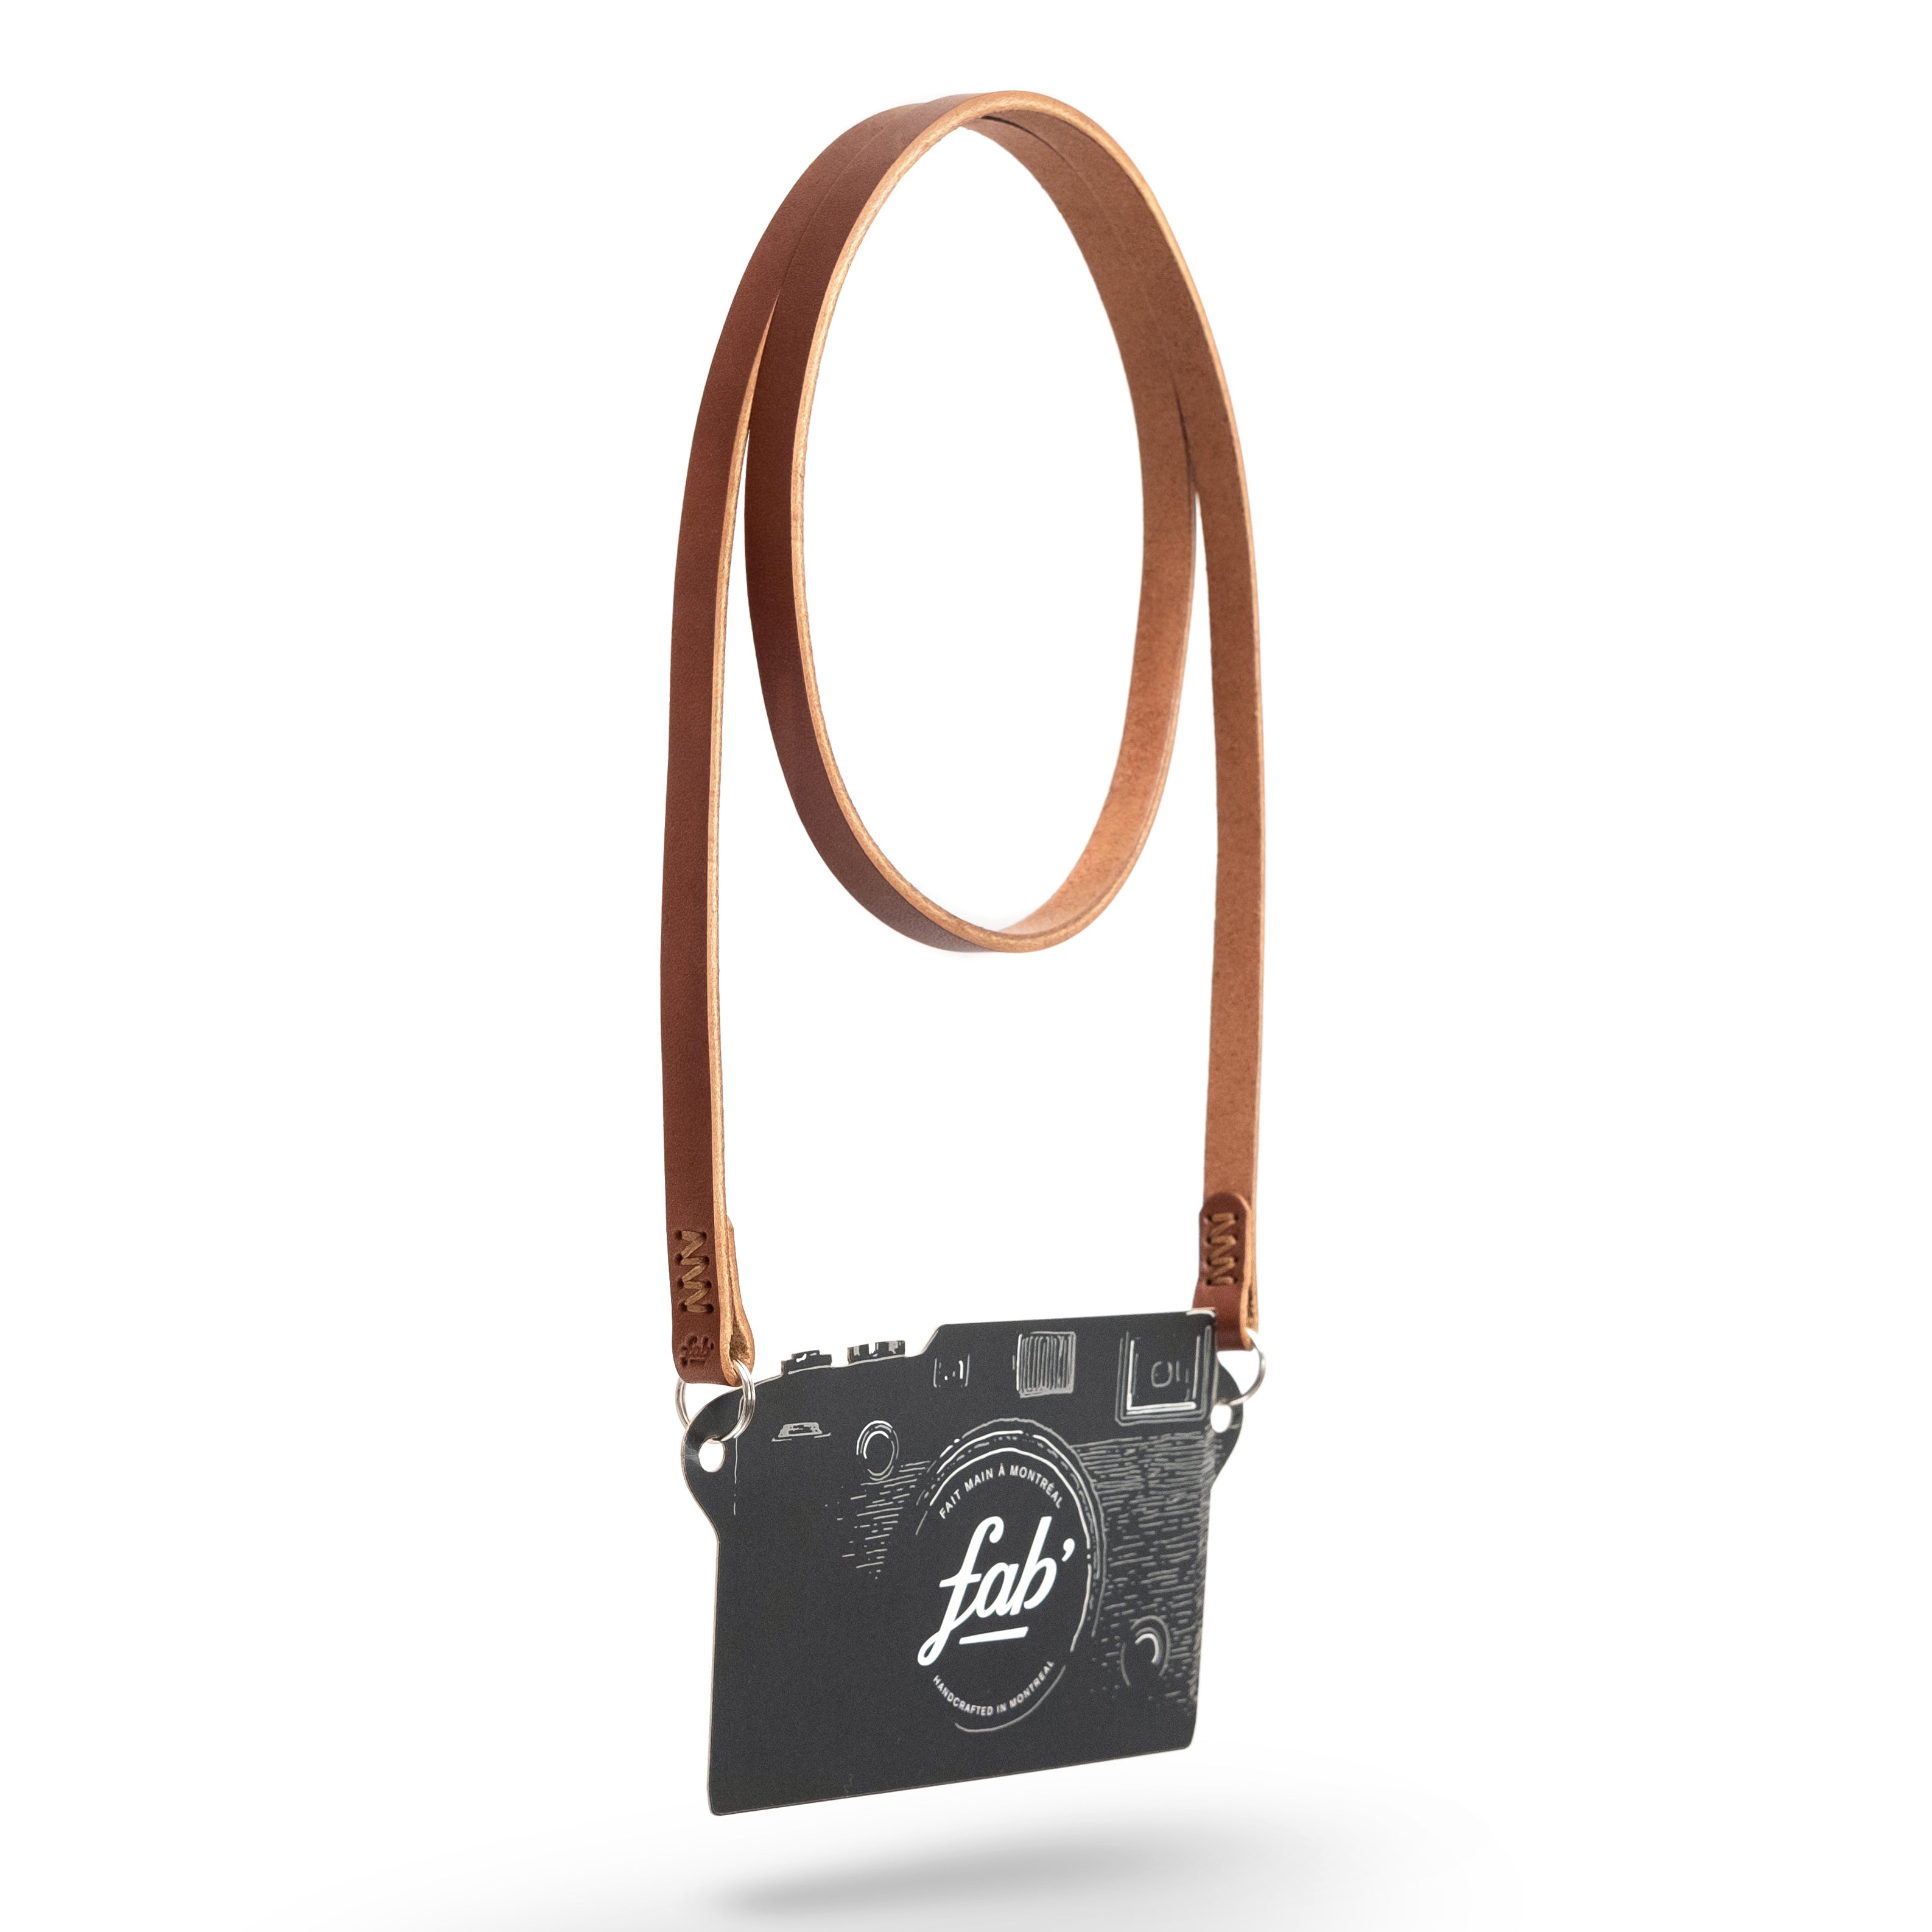 Fab' F4 strap - Brown leather - Size M-L (47")